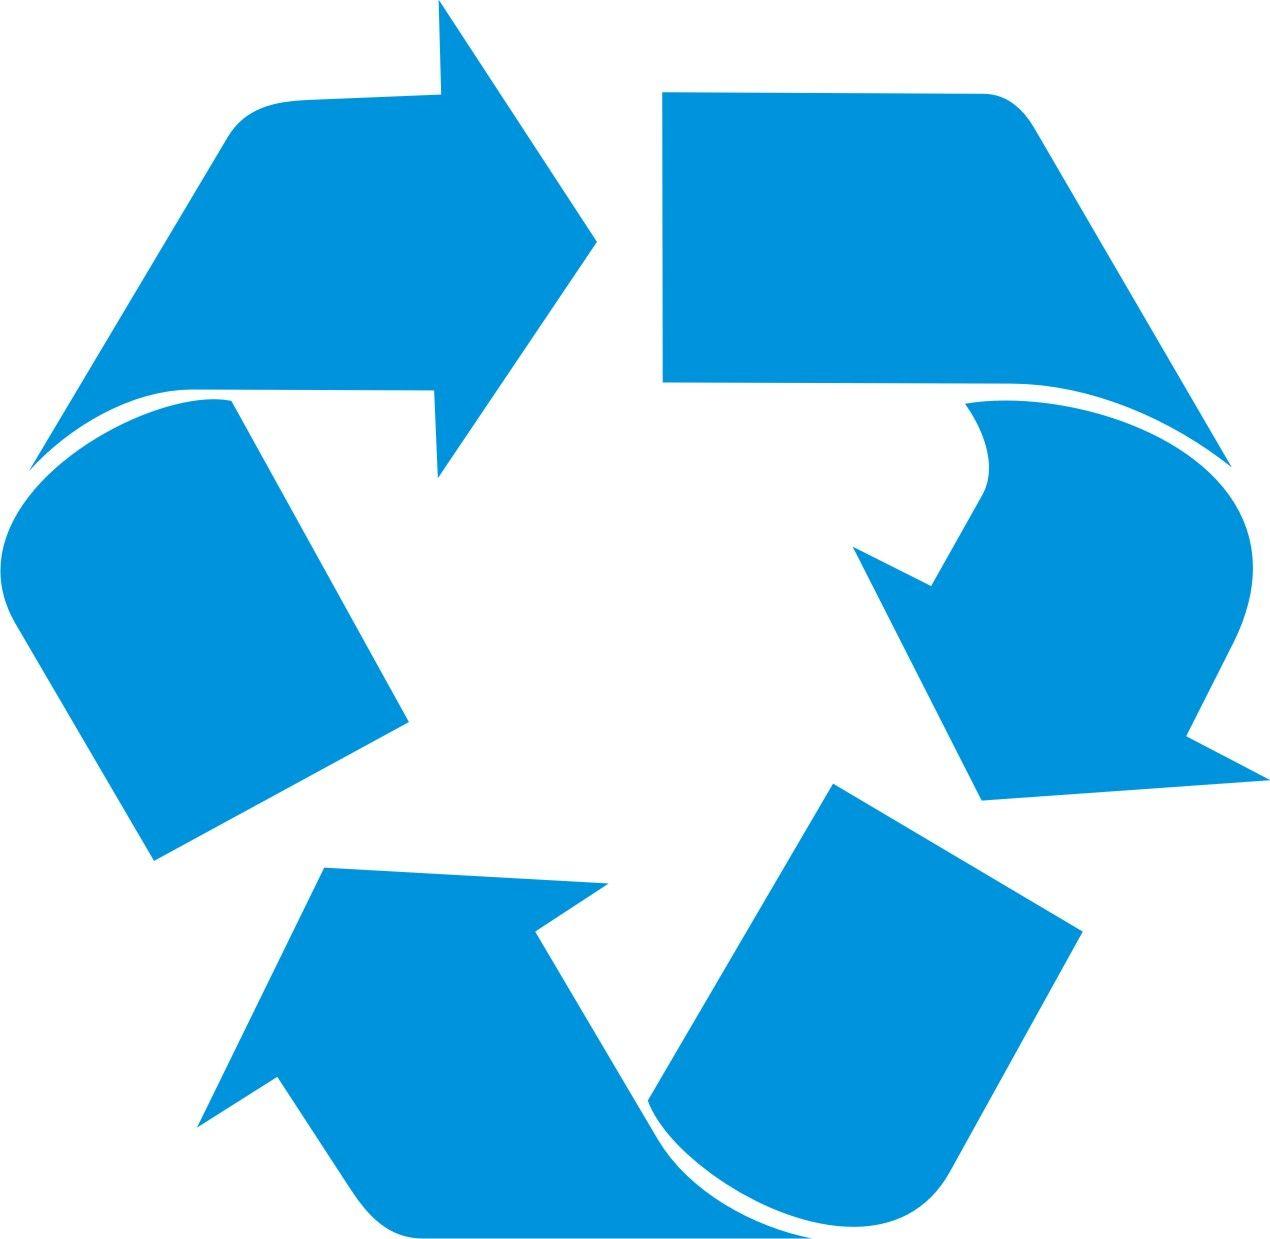 Blue Recycling Logo - Free Recycling Sign, Download Free Clip Art, Free Clip Art on ...